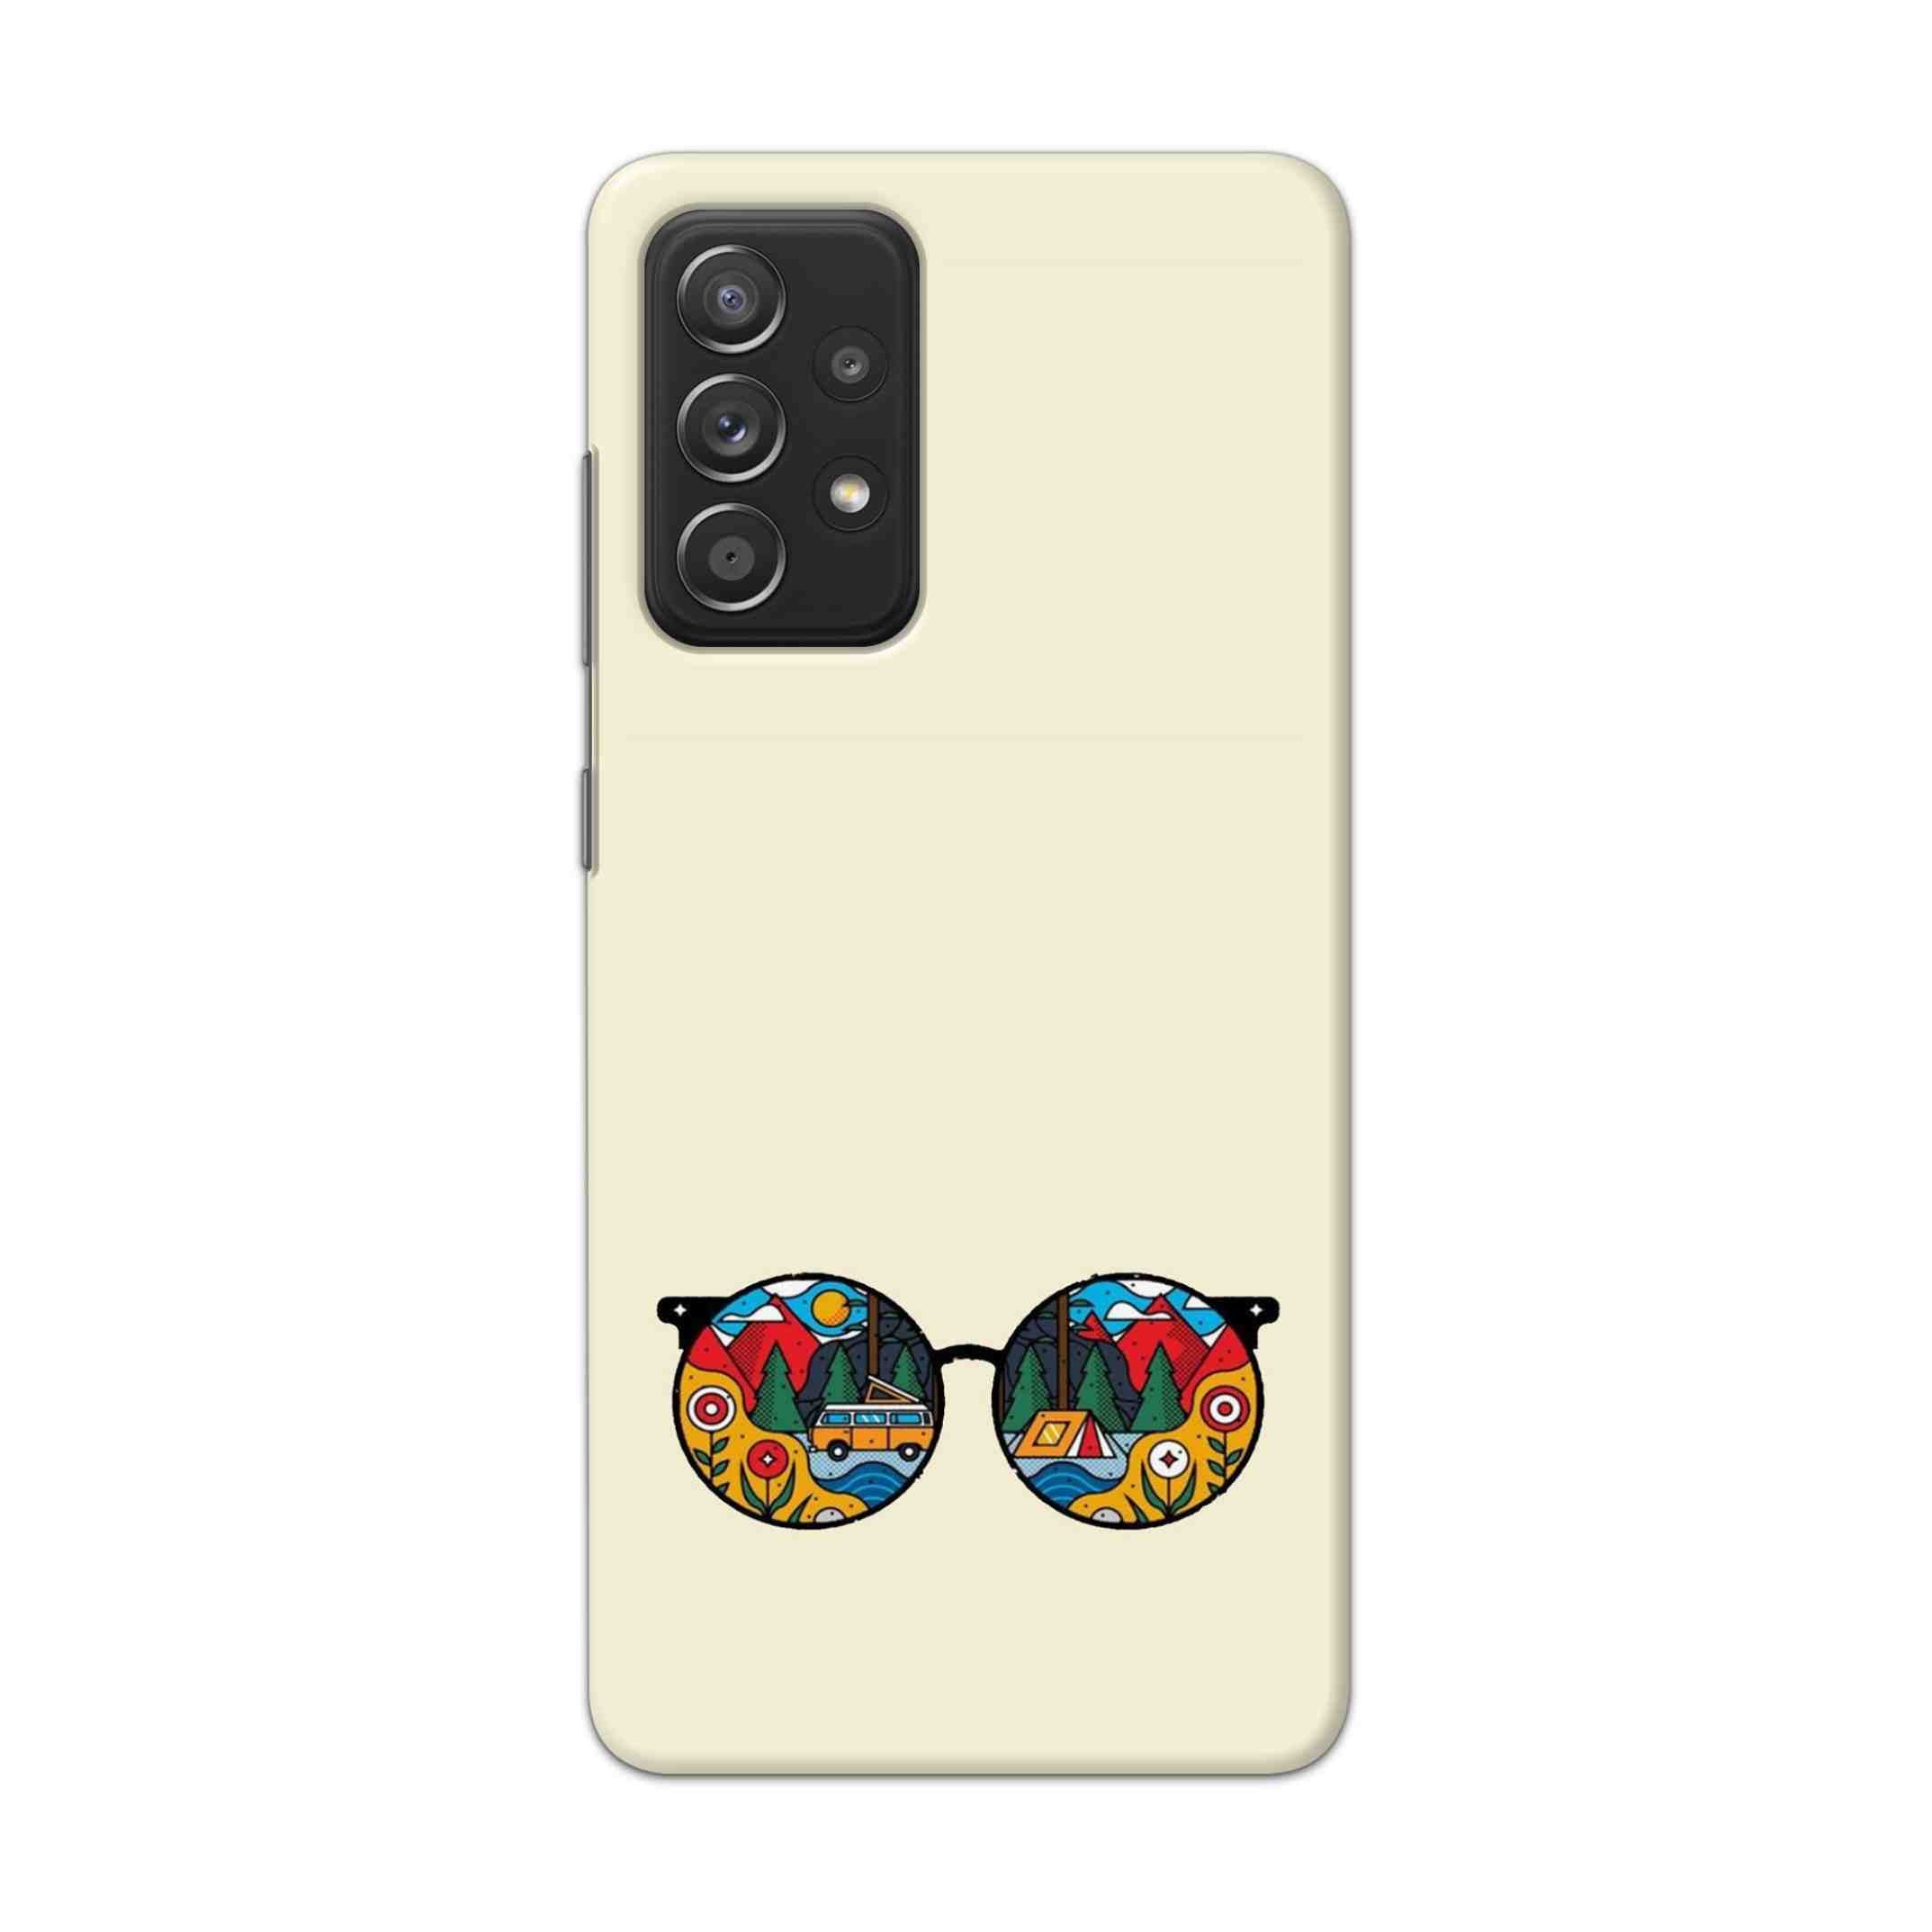 Buy Rainbow Sunglasses Hard Back Mobile Phone Case Cover For Samsung Galaxy A52 Online